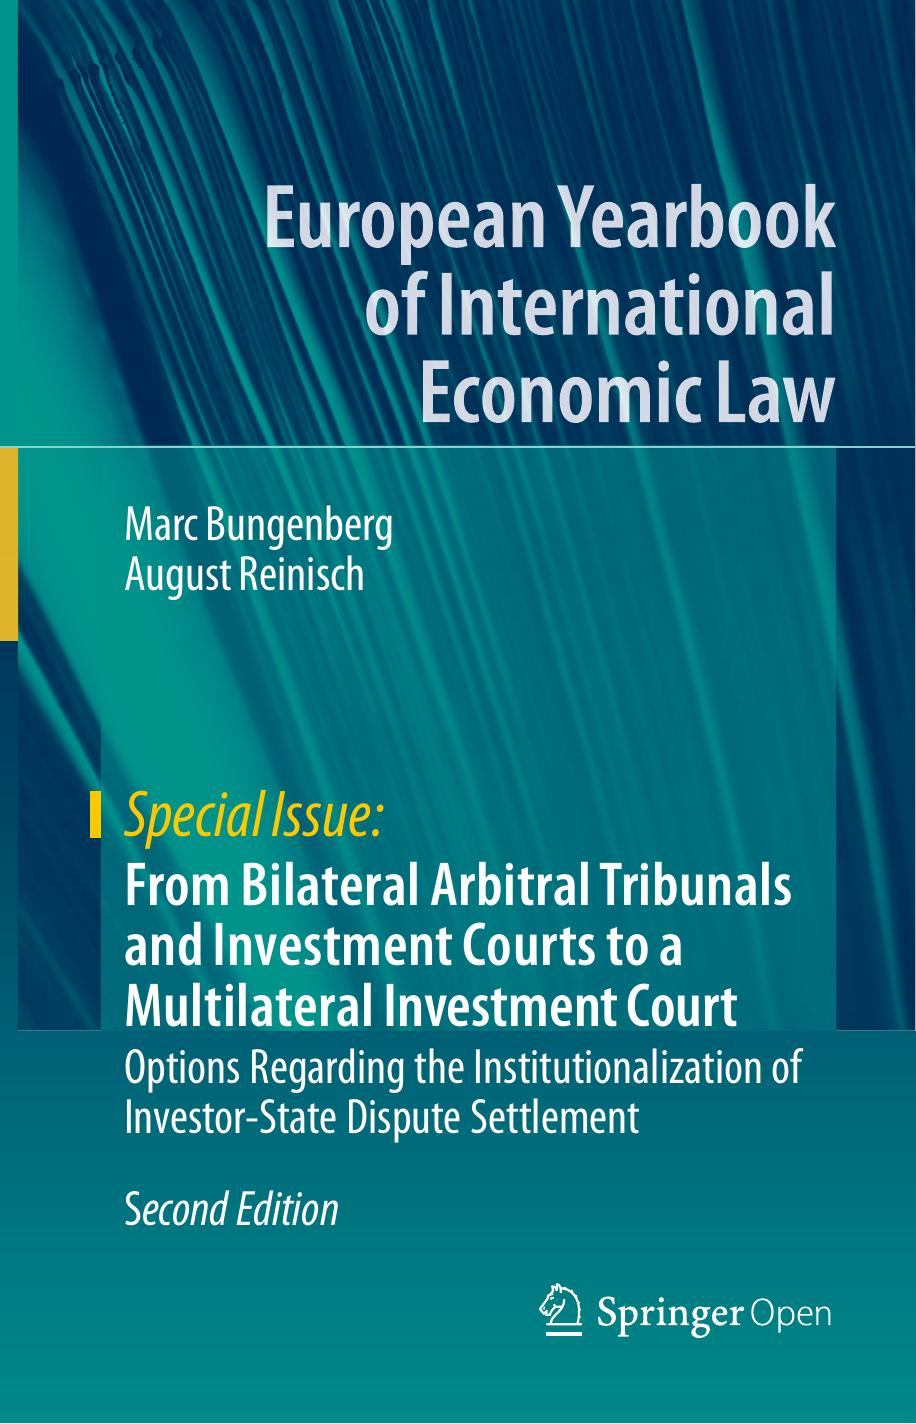 From Bilateral Arbitral Tribunals and Investment Courts to a Multilateral Investment Court by Marc Bungenberg & August Reinisch